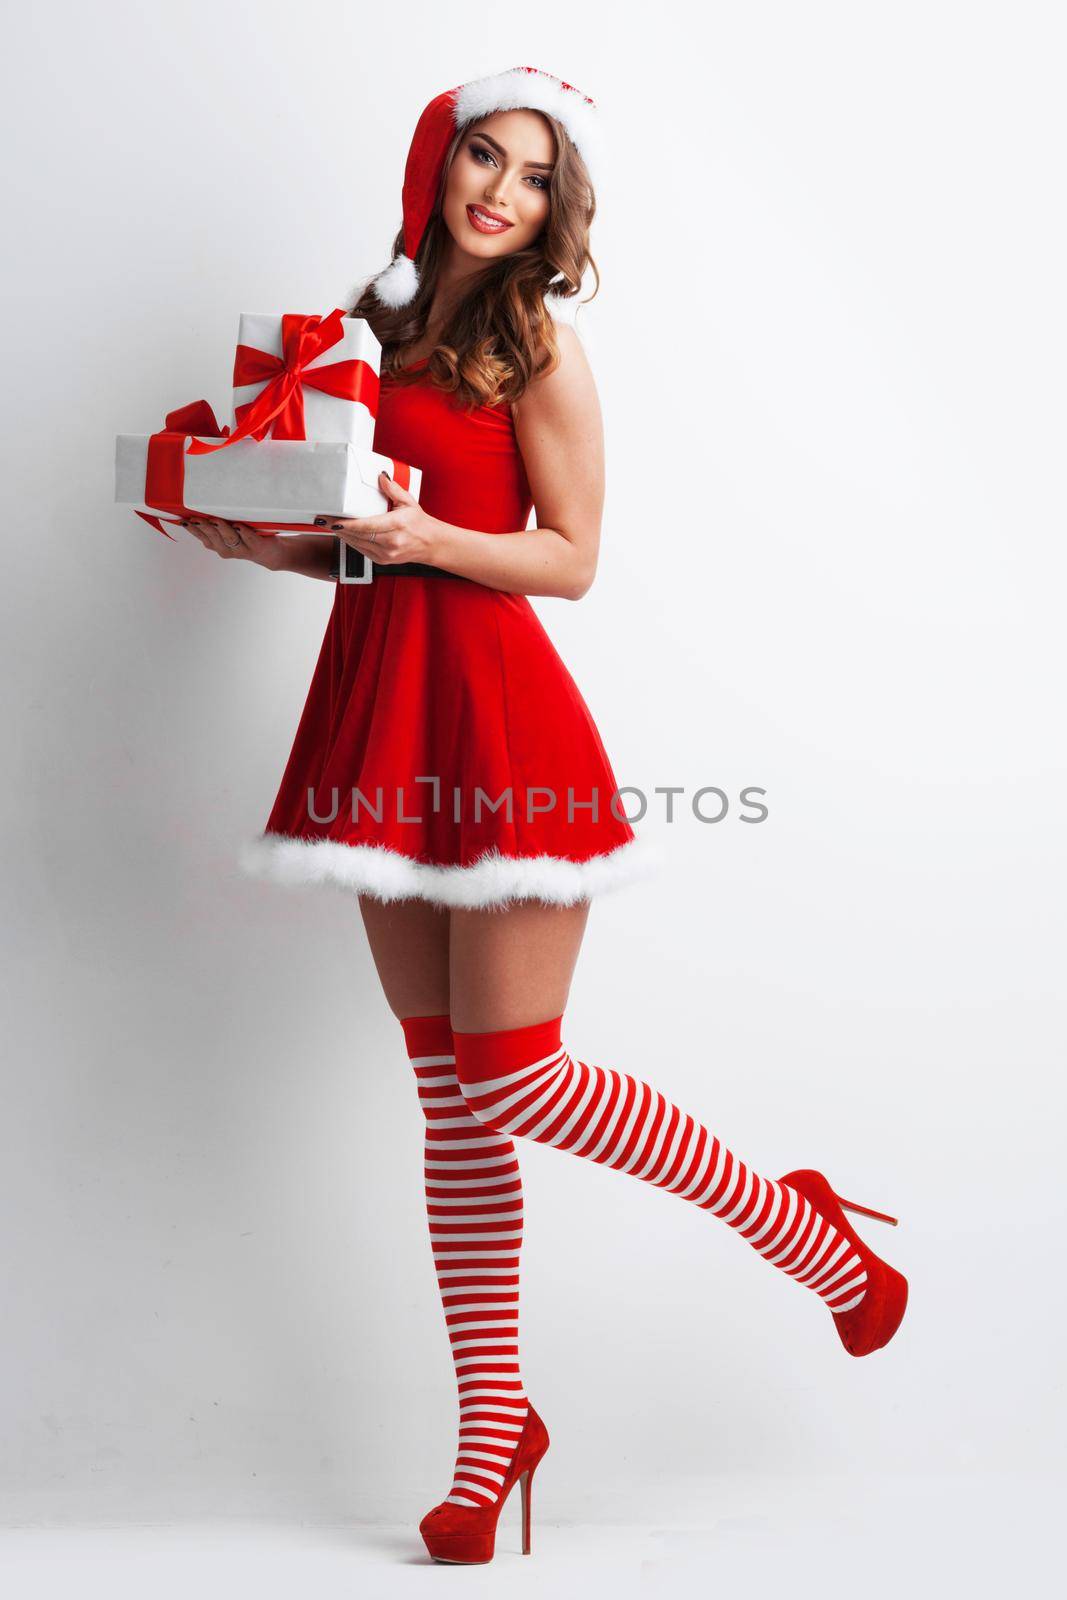 Full length portrait of beautiful girl in Santa Claus style dress and hat holding Christmas gifts